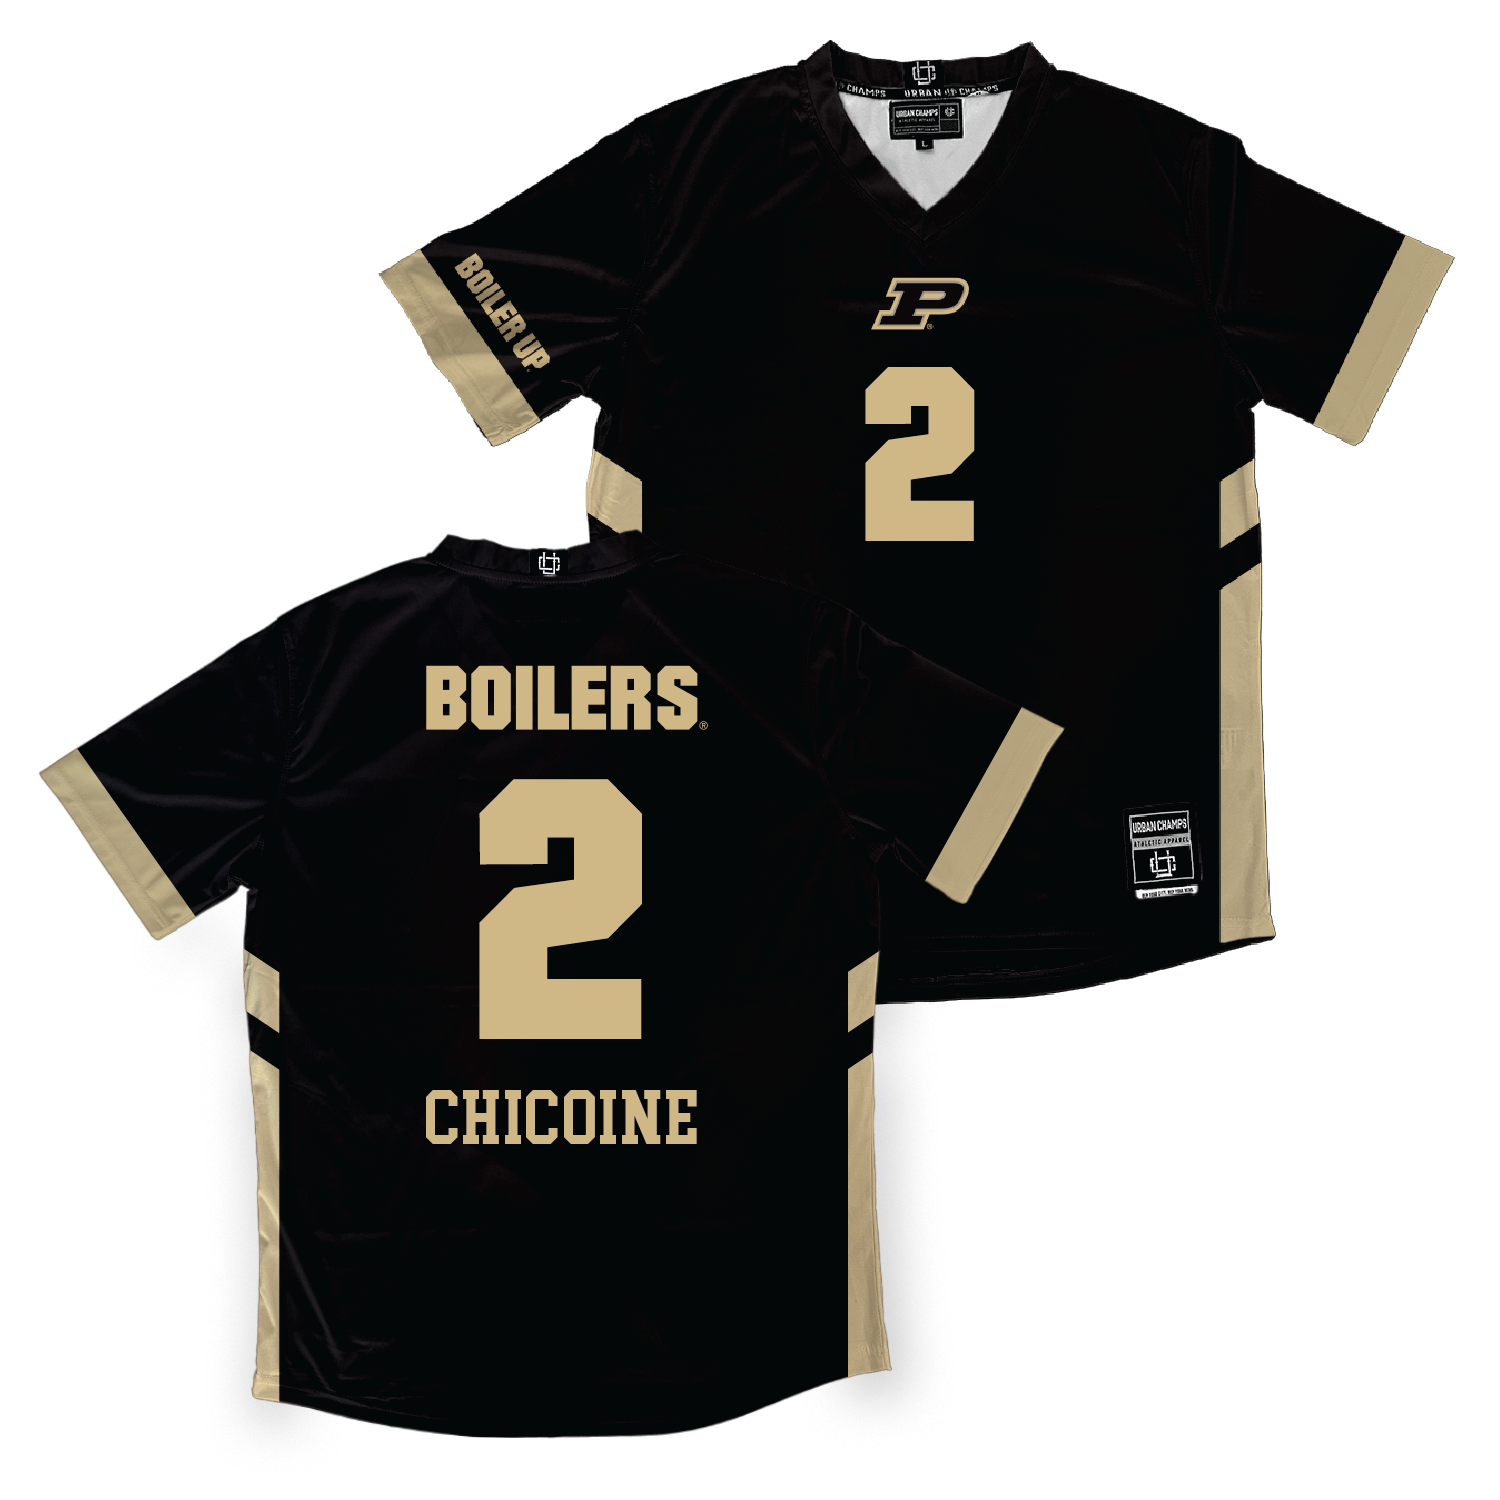 Black Purdue Women's Volleyball Jersey - Chloe Chicoine | #2 Youth Small